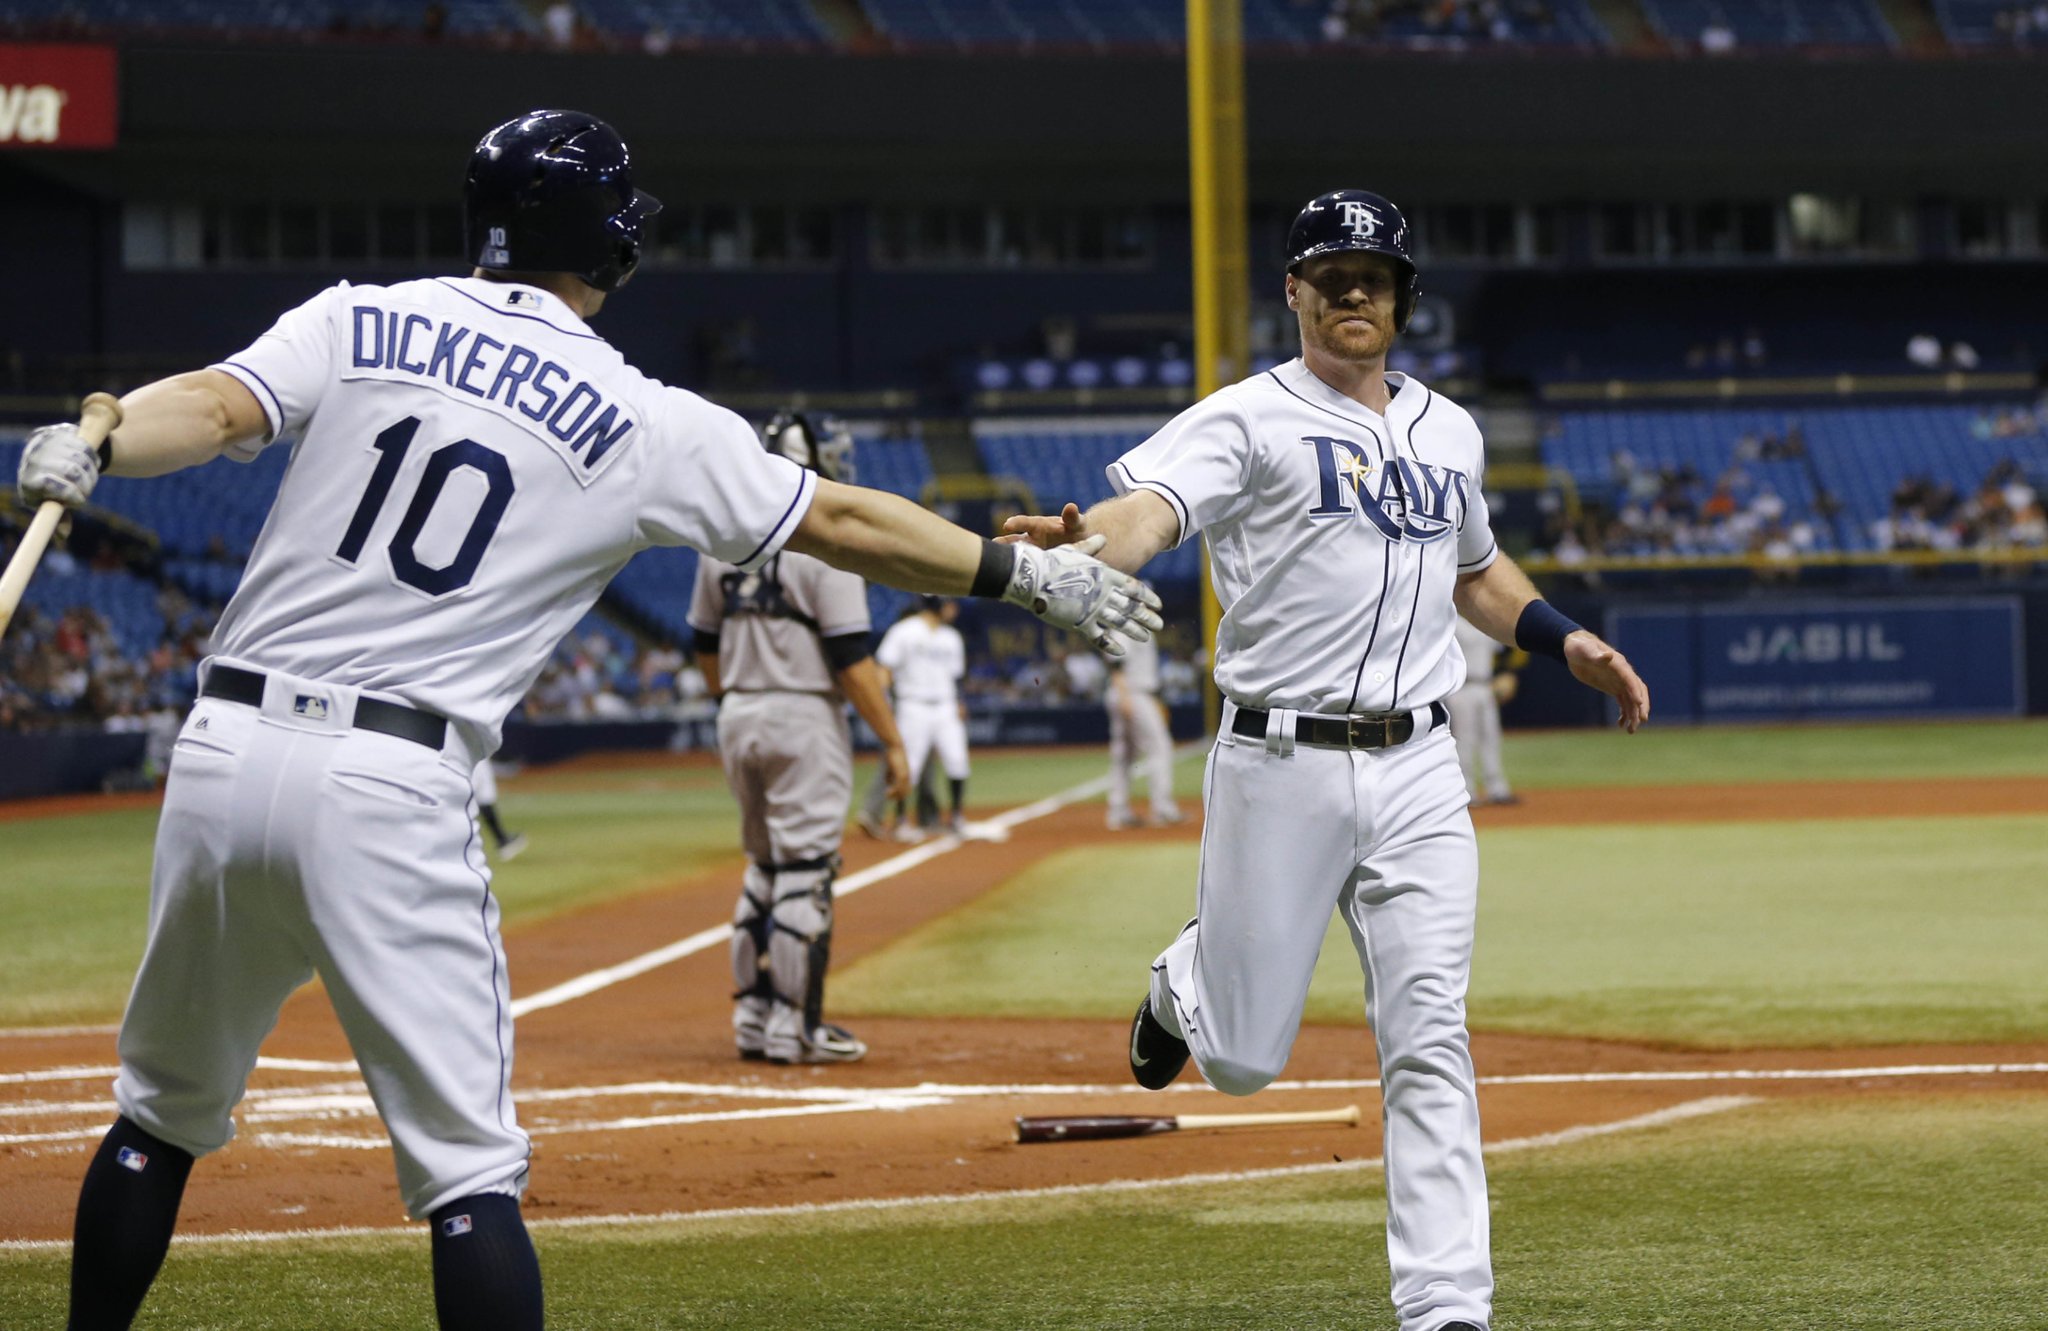 Logan Forsythe scored on Brad Miller's first inning, RBI single. The Rays tallied one more run on Thursday en route to their eighth shutout of the season. (Photo Credit: Tampa Bay Rays)